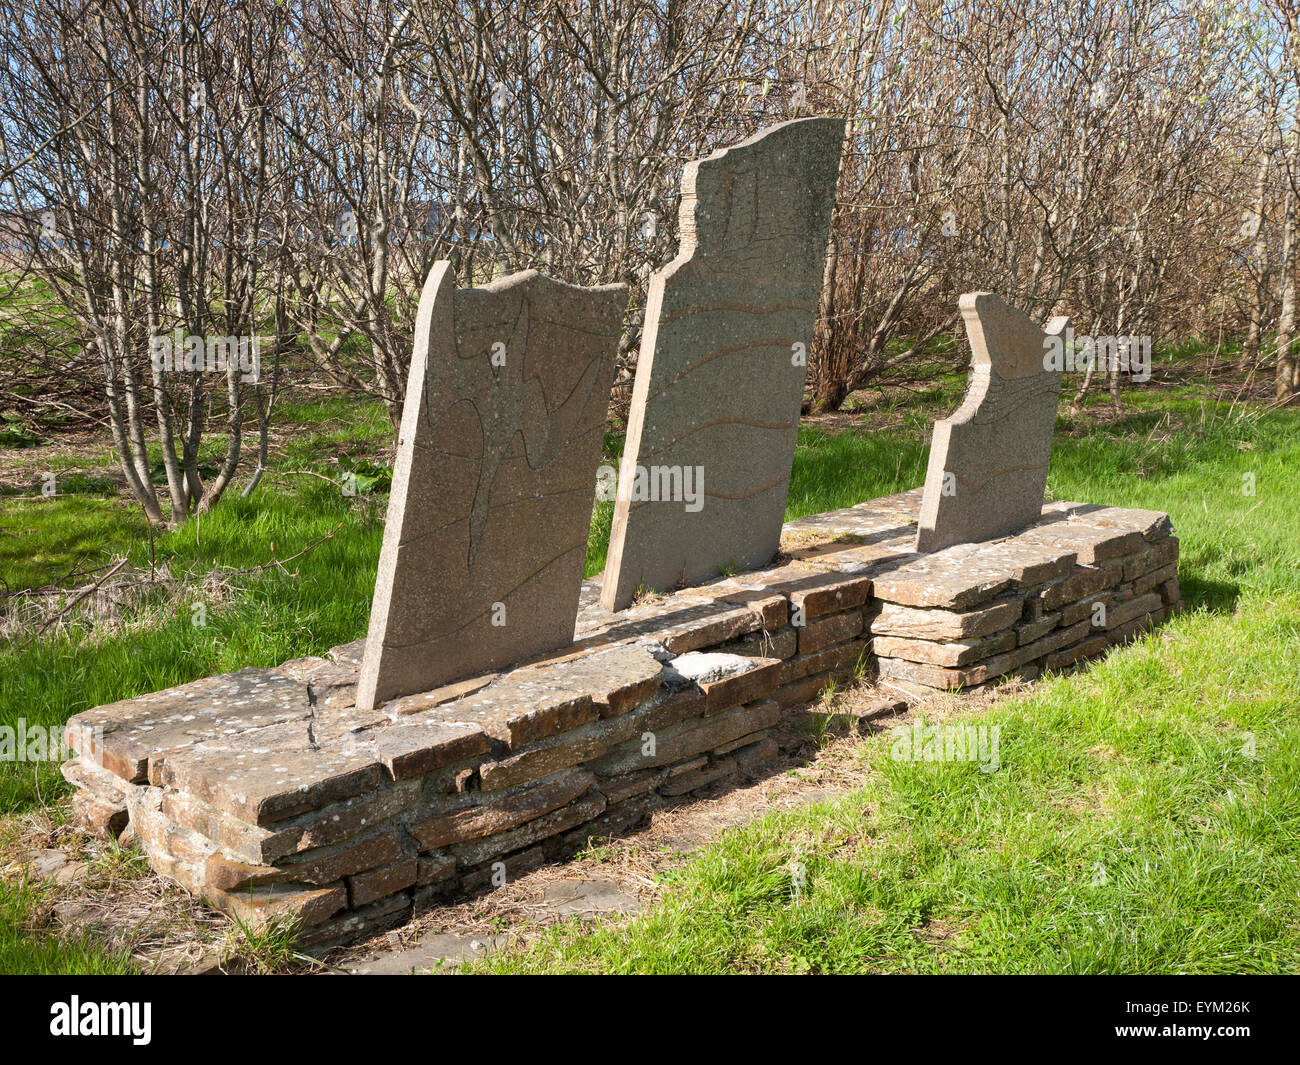 Sculpture made from Caithness flagstone, in the Castletown Community Woodland, Caithness, Scotland, UK. Stock Photo